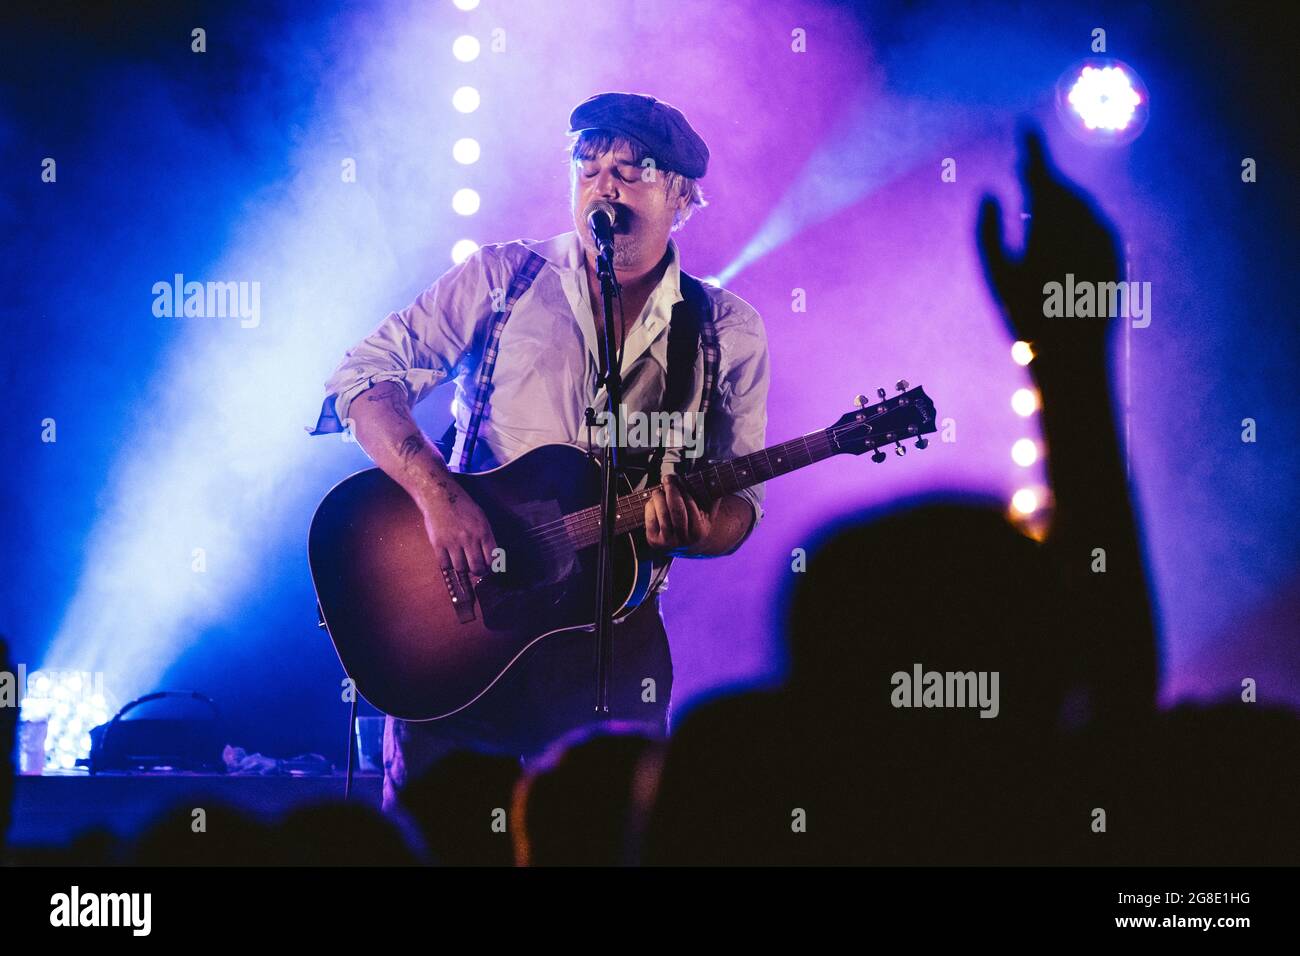 Newcastle Upon Tyne, UK. 19th July 2021 - Newcastle, UK: Pete Doherty peforms an intimate solo concert at The Riverside in Newcastle Upon Tyne, England on the evening coronavirus restrictions were lifted in England. Credit: Thomas Jackson/Alamy Live News Stock Photo